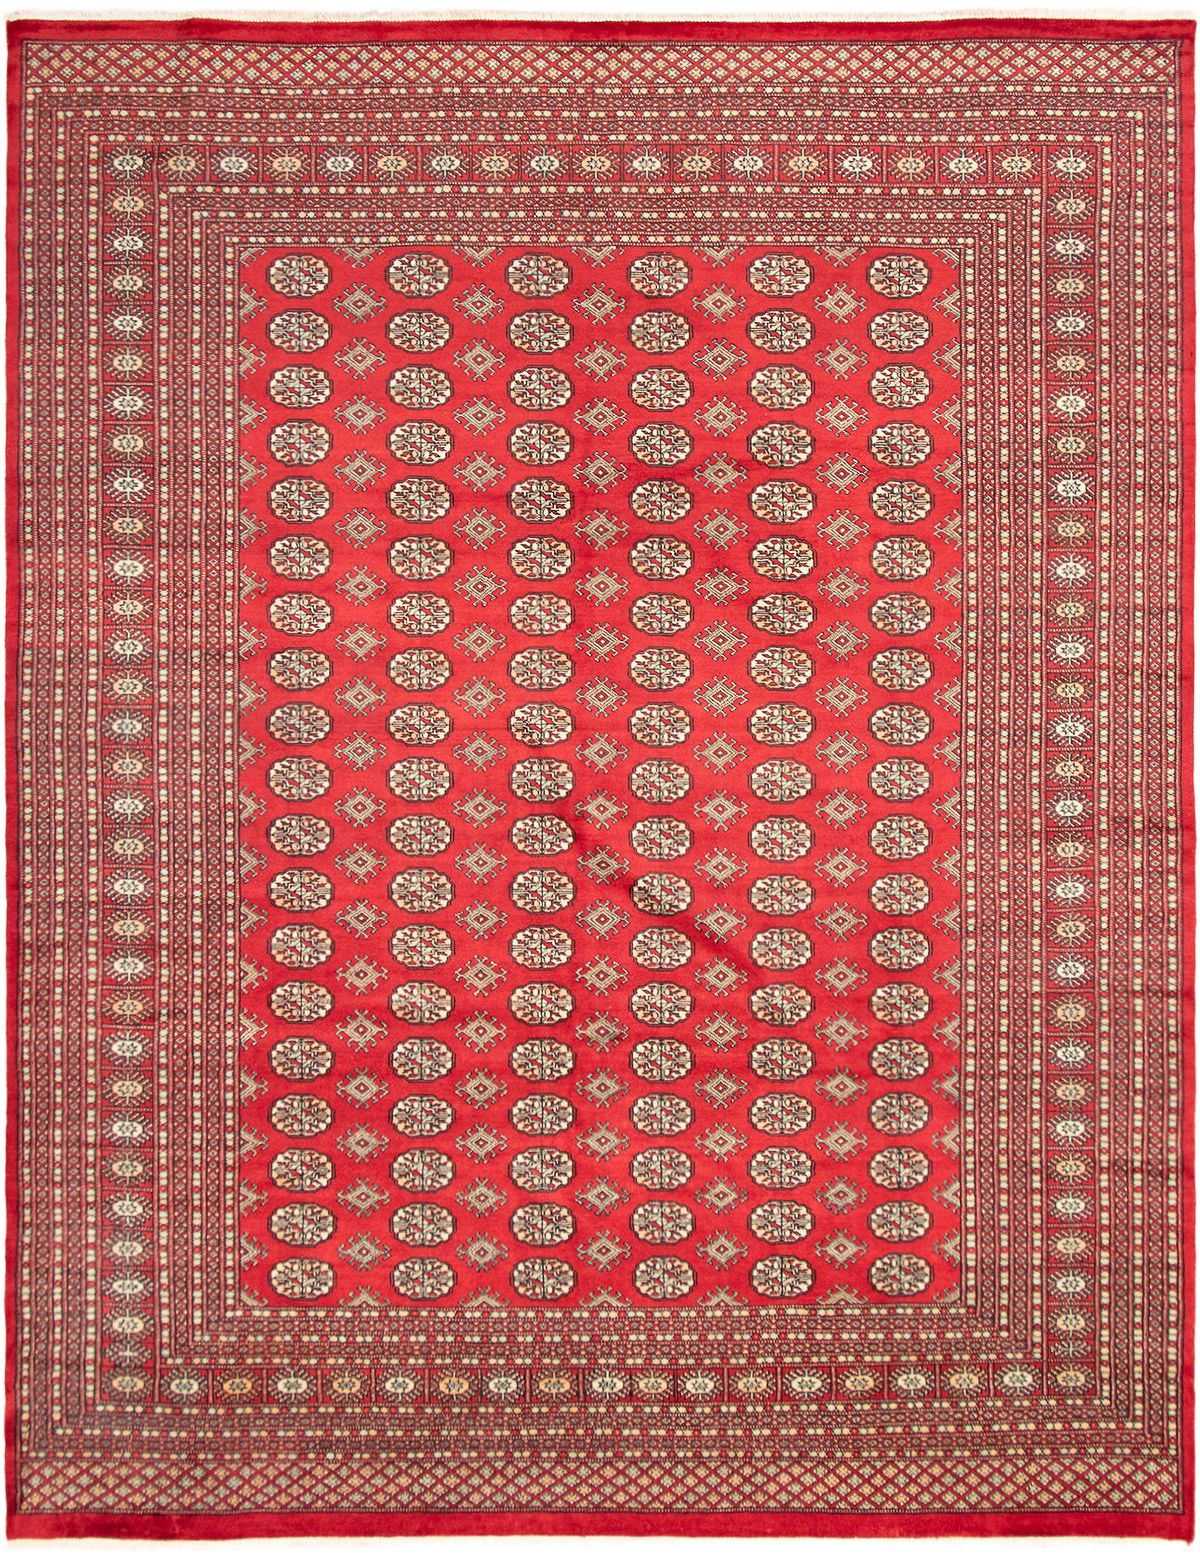 Hand-knotted Finest Peshawar Bokhara Red Wool Rug 9'2" x 11'10" Size: 9'2" x 11'10"  